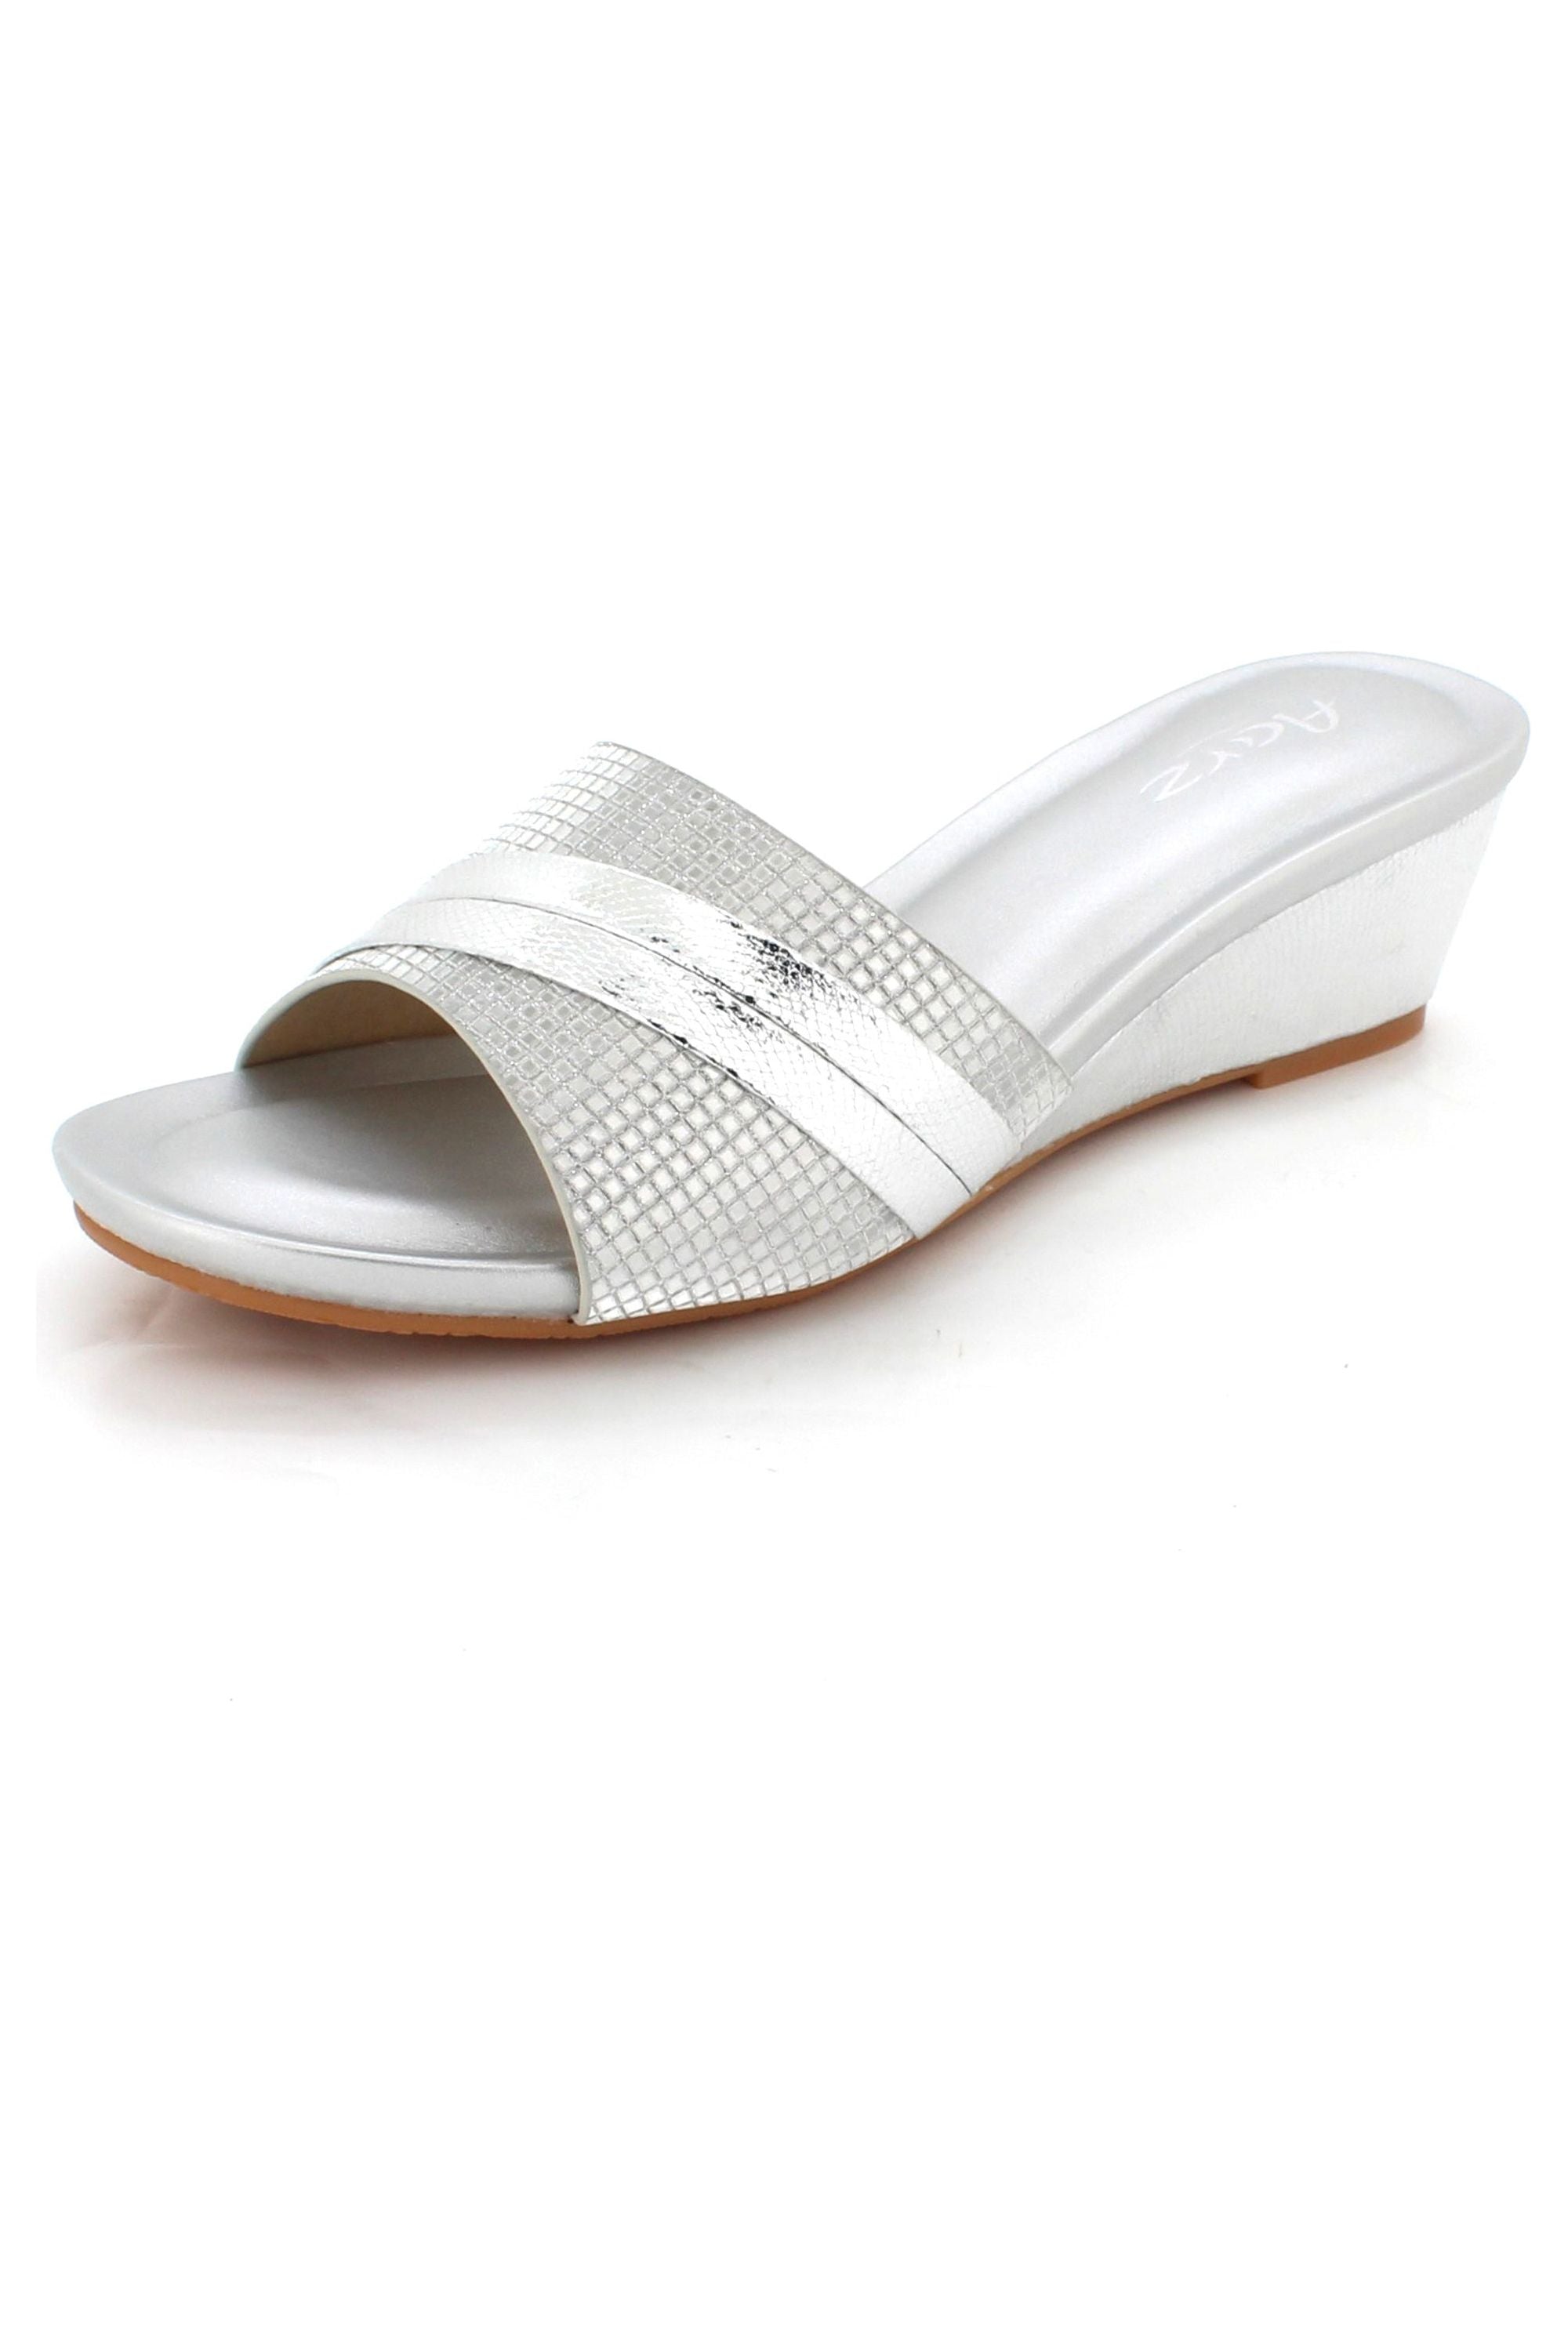 Open Toe Cushioned Everyday Wear Soft Lightweight Sandals L7839